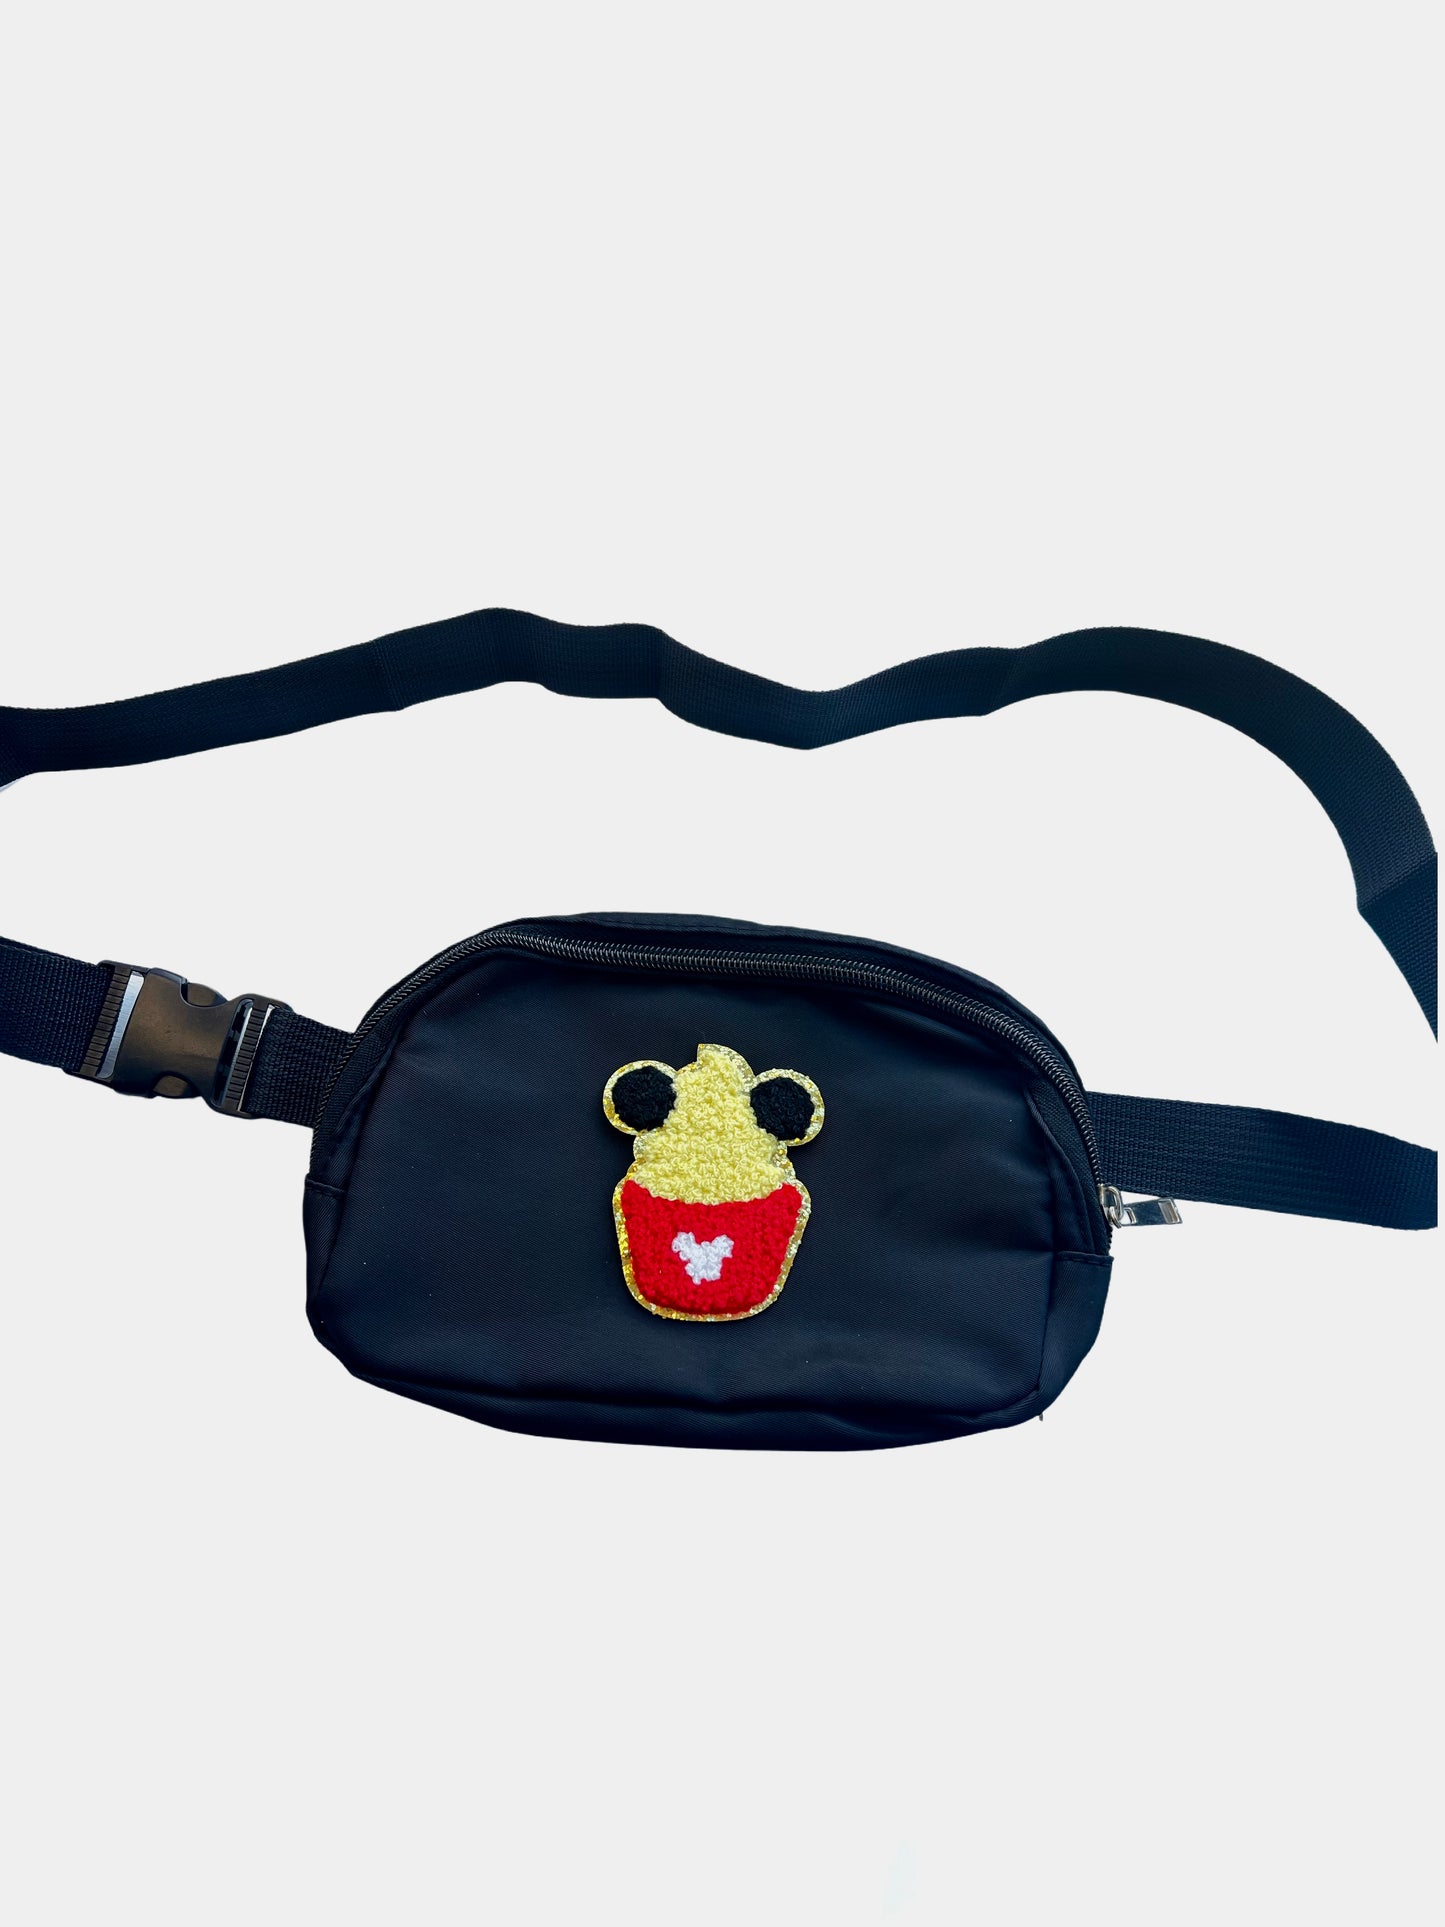 Mouse Ears Dole Whip Cross-Body Belt Bag Parks Collection